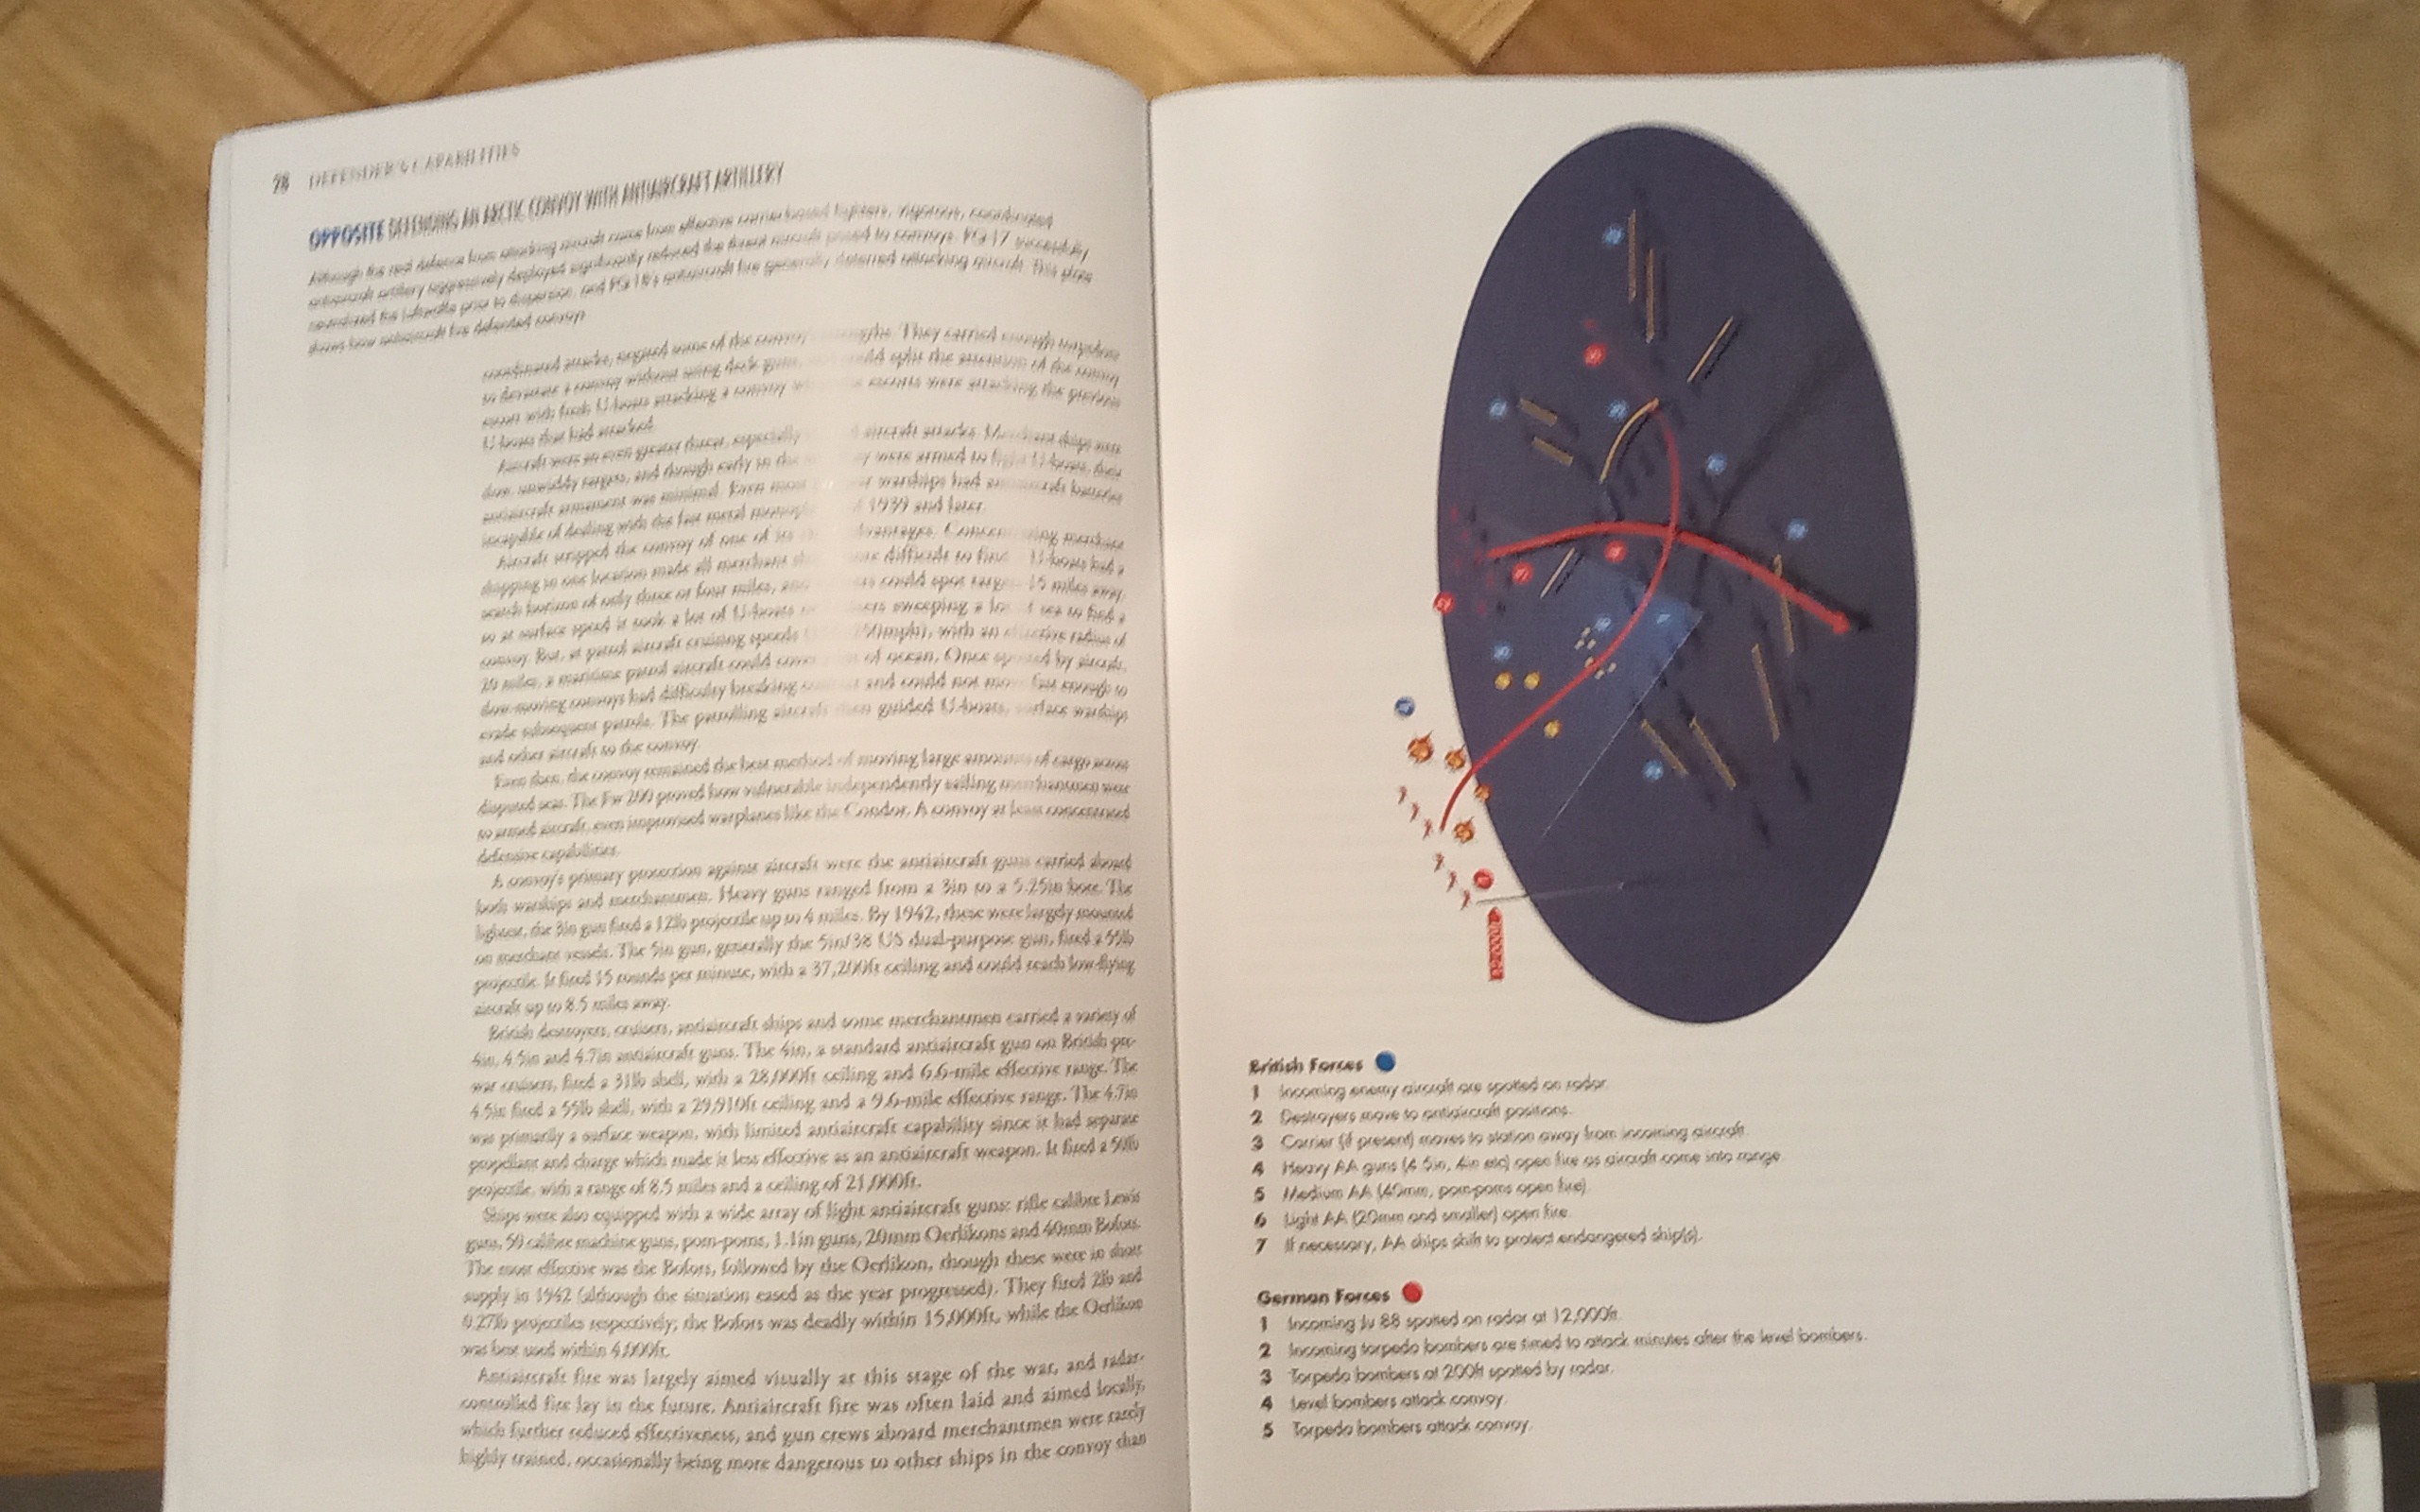 The explanation for the diagram right is at the top of the page, left.